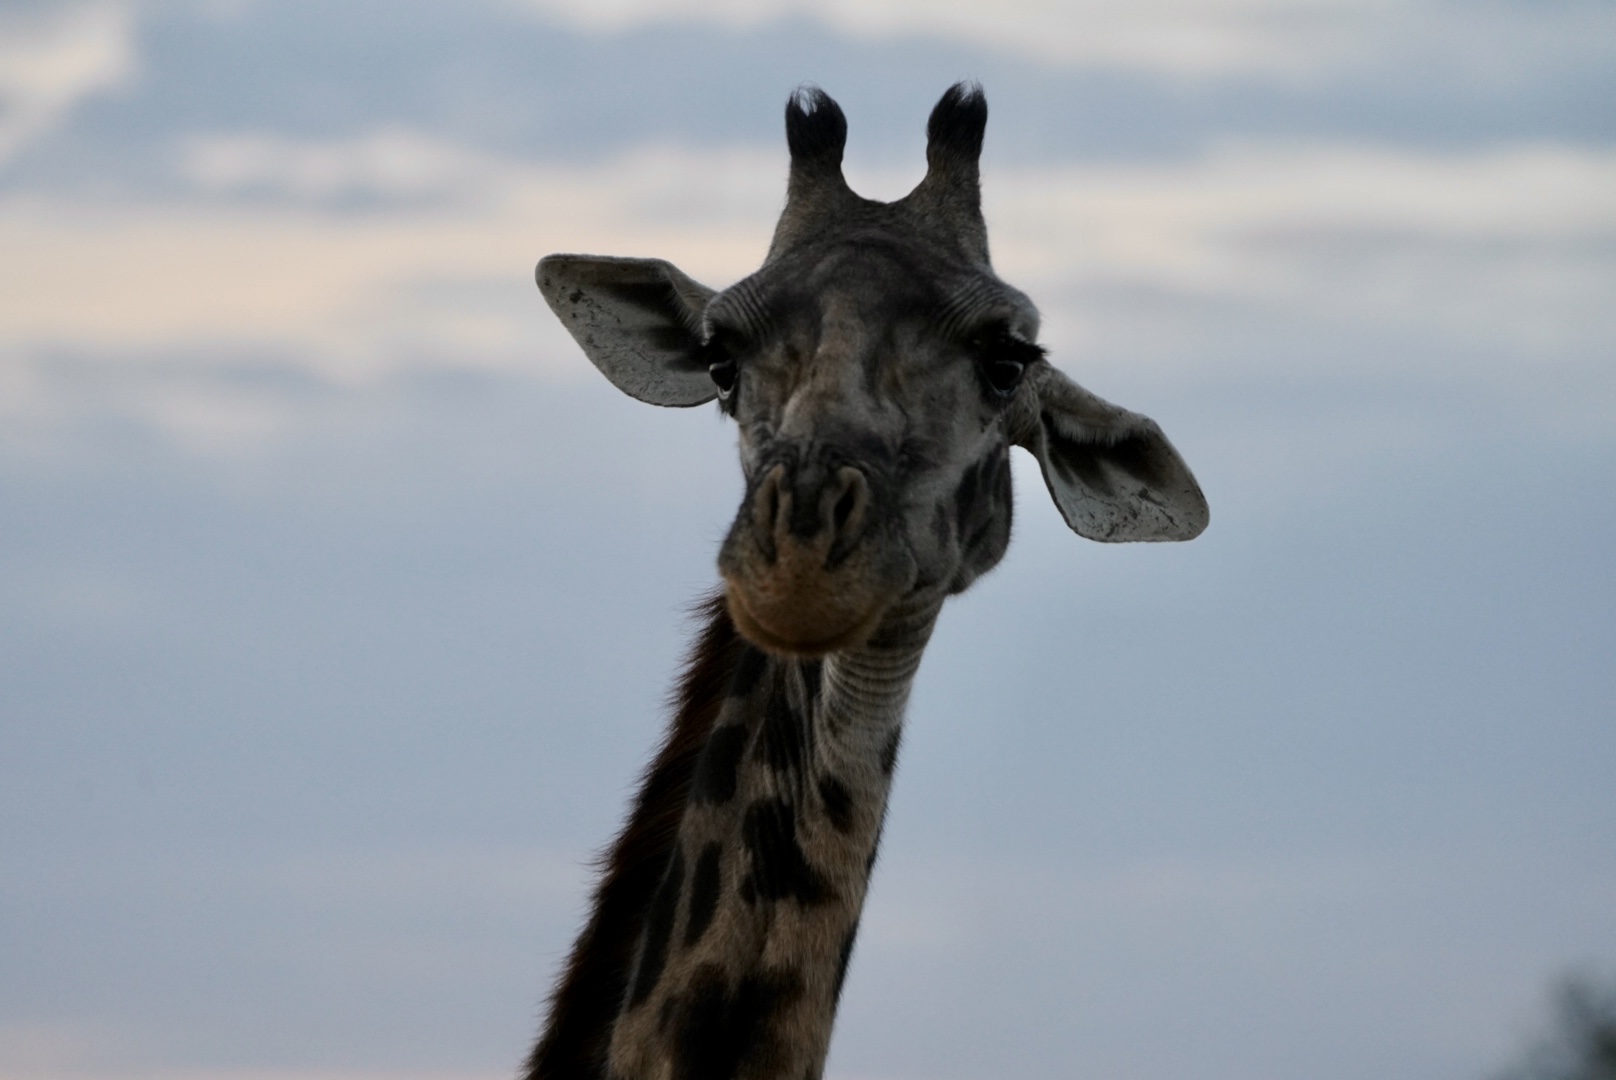 The head and very top of the neck of a giraffe looking on toward the camera. Behind it is a blue-purple evening sky.